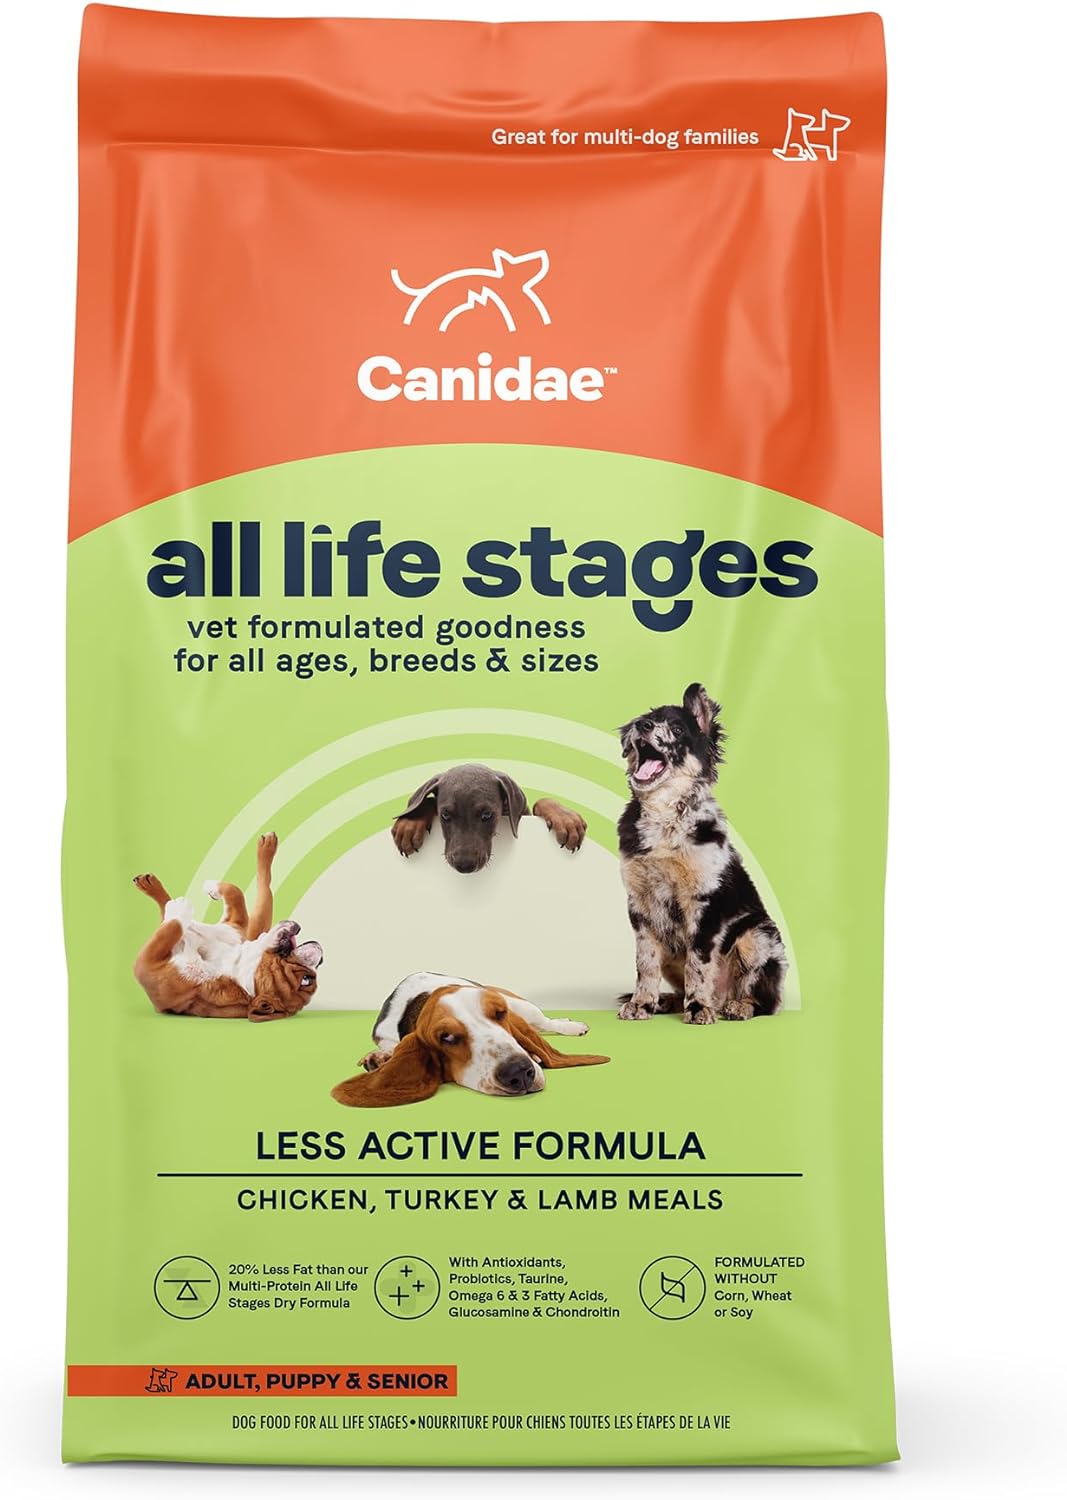 Canidae All Life Stages Less Active Formula Canidae Platinum Chicken, Turkey, Lamb, & Fish Meals Dry Dog Food – Gallery Image 1